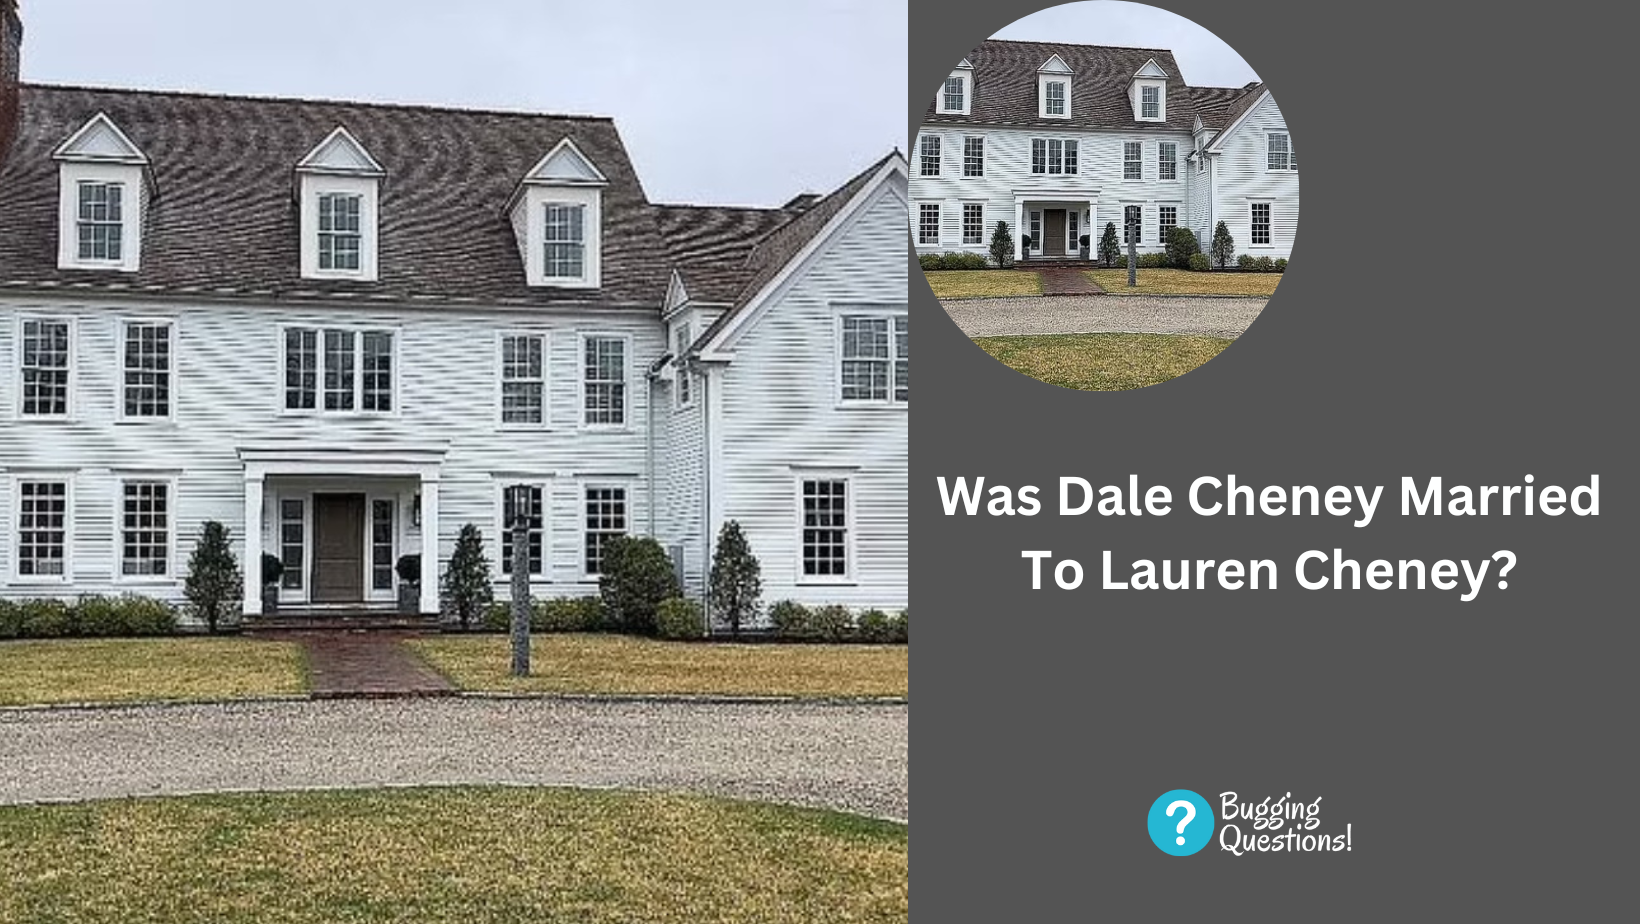 Was Dale Cheney Married To Lauren Cheney?